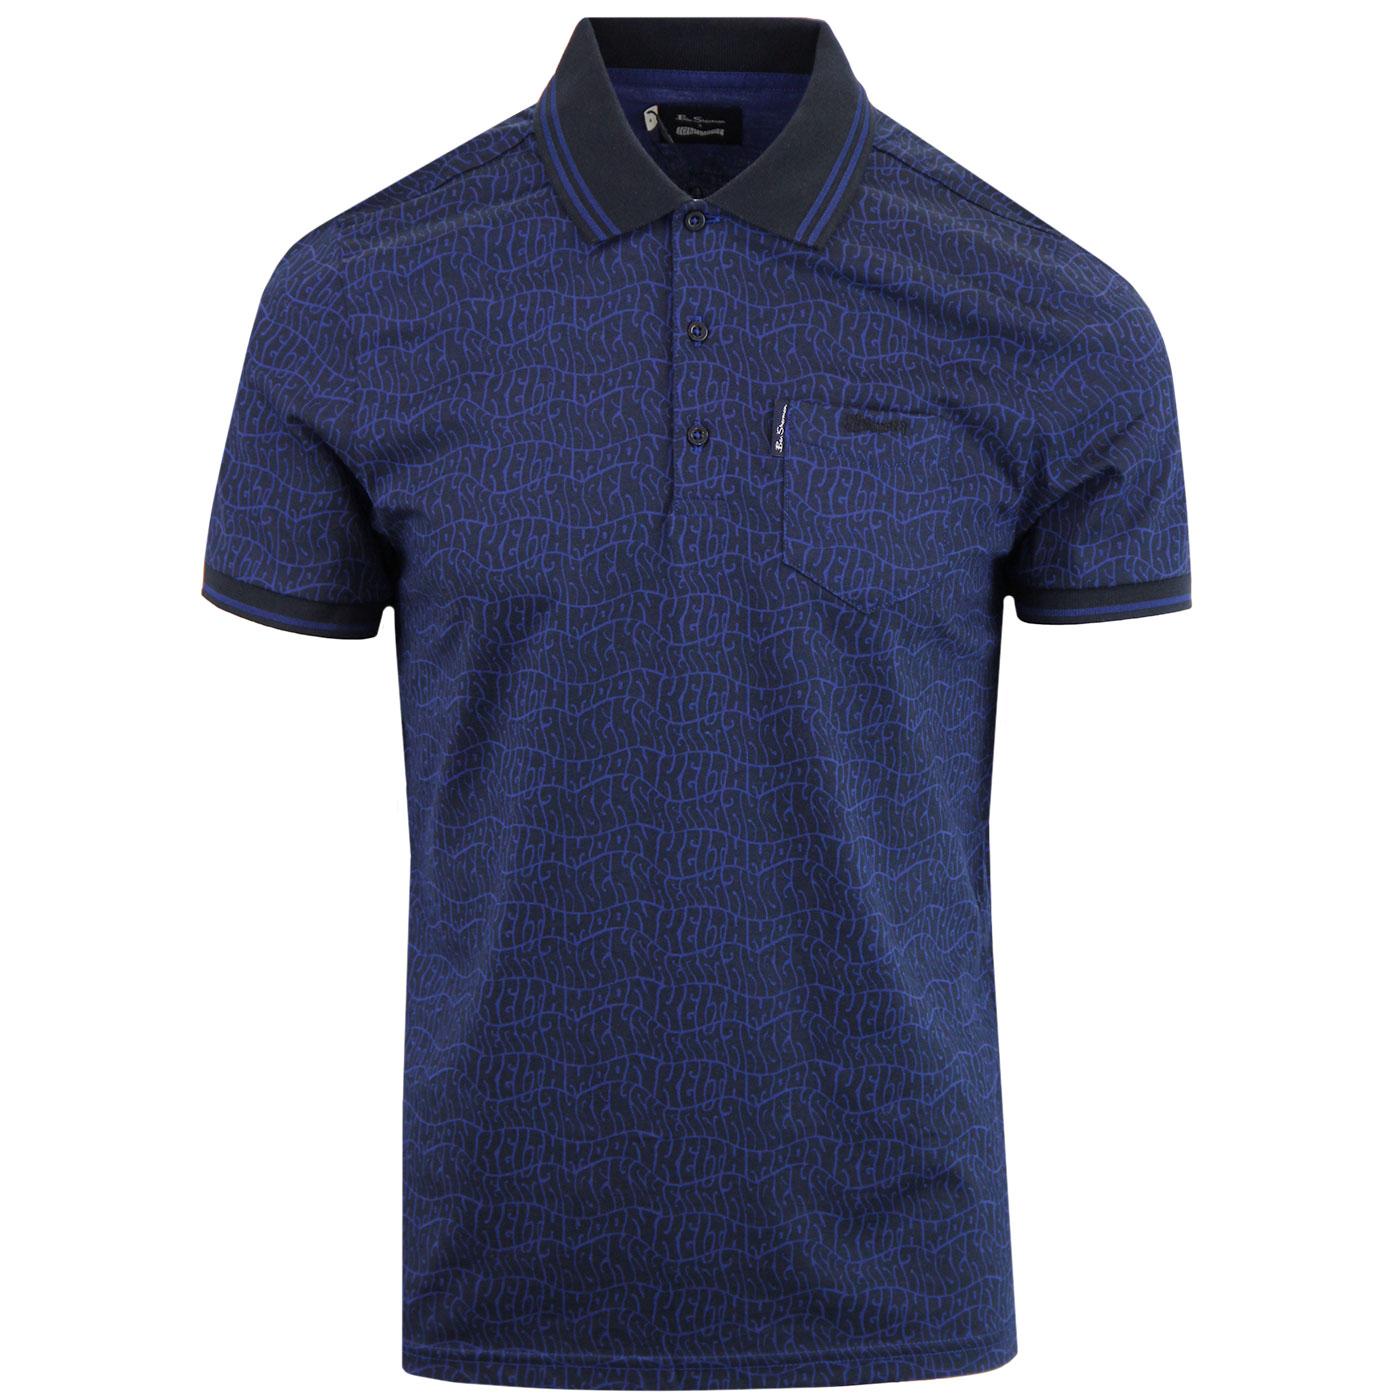 BEN SHERMAN x KEITH MOON Limited Edition Signature Polo